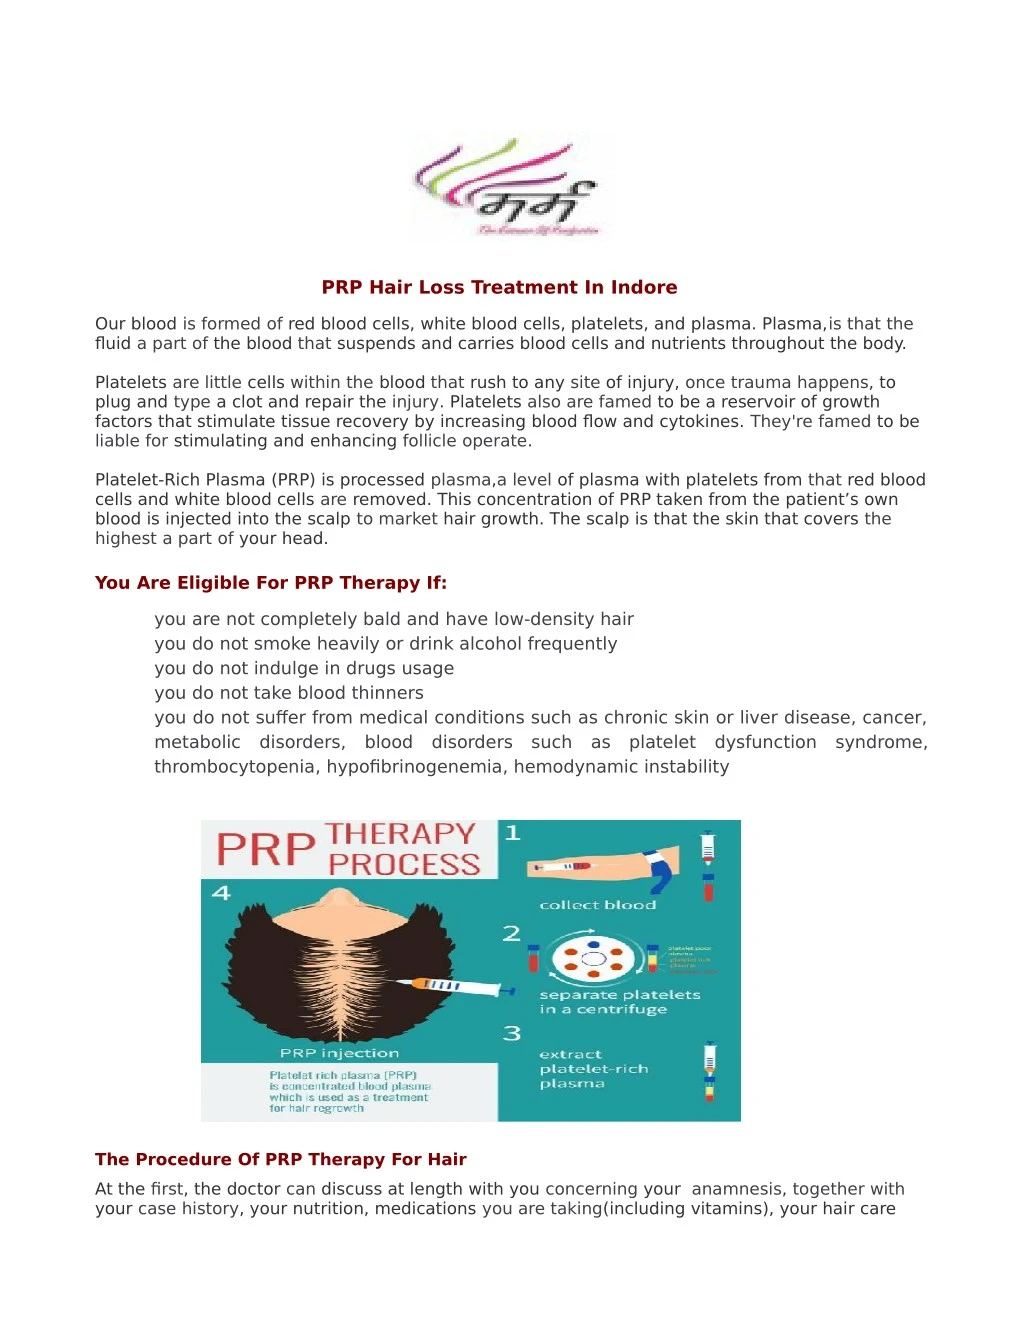 prp hair loss treatment in indore n.